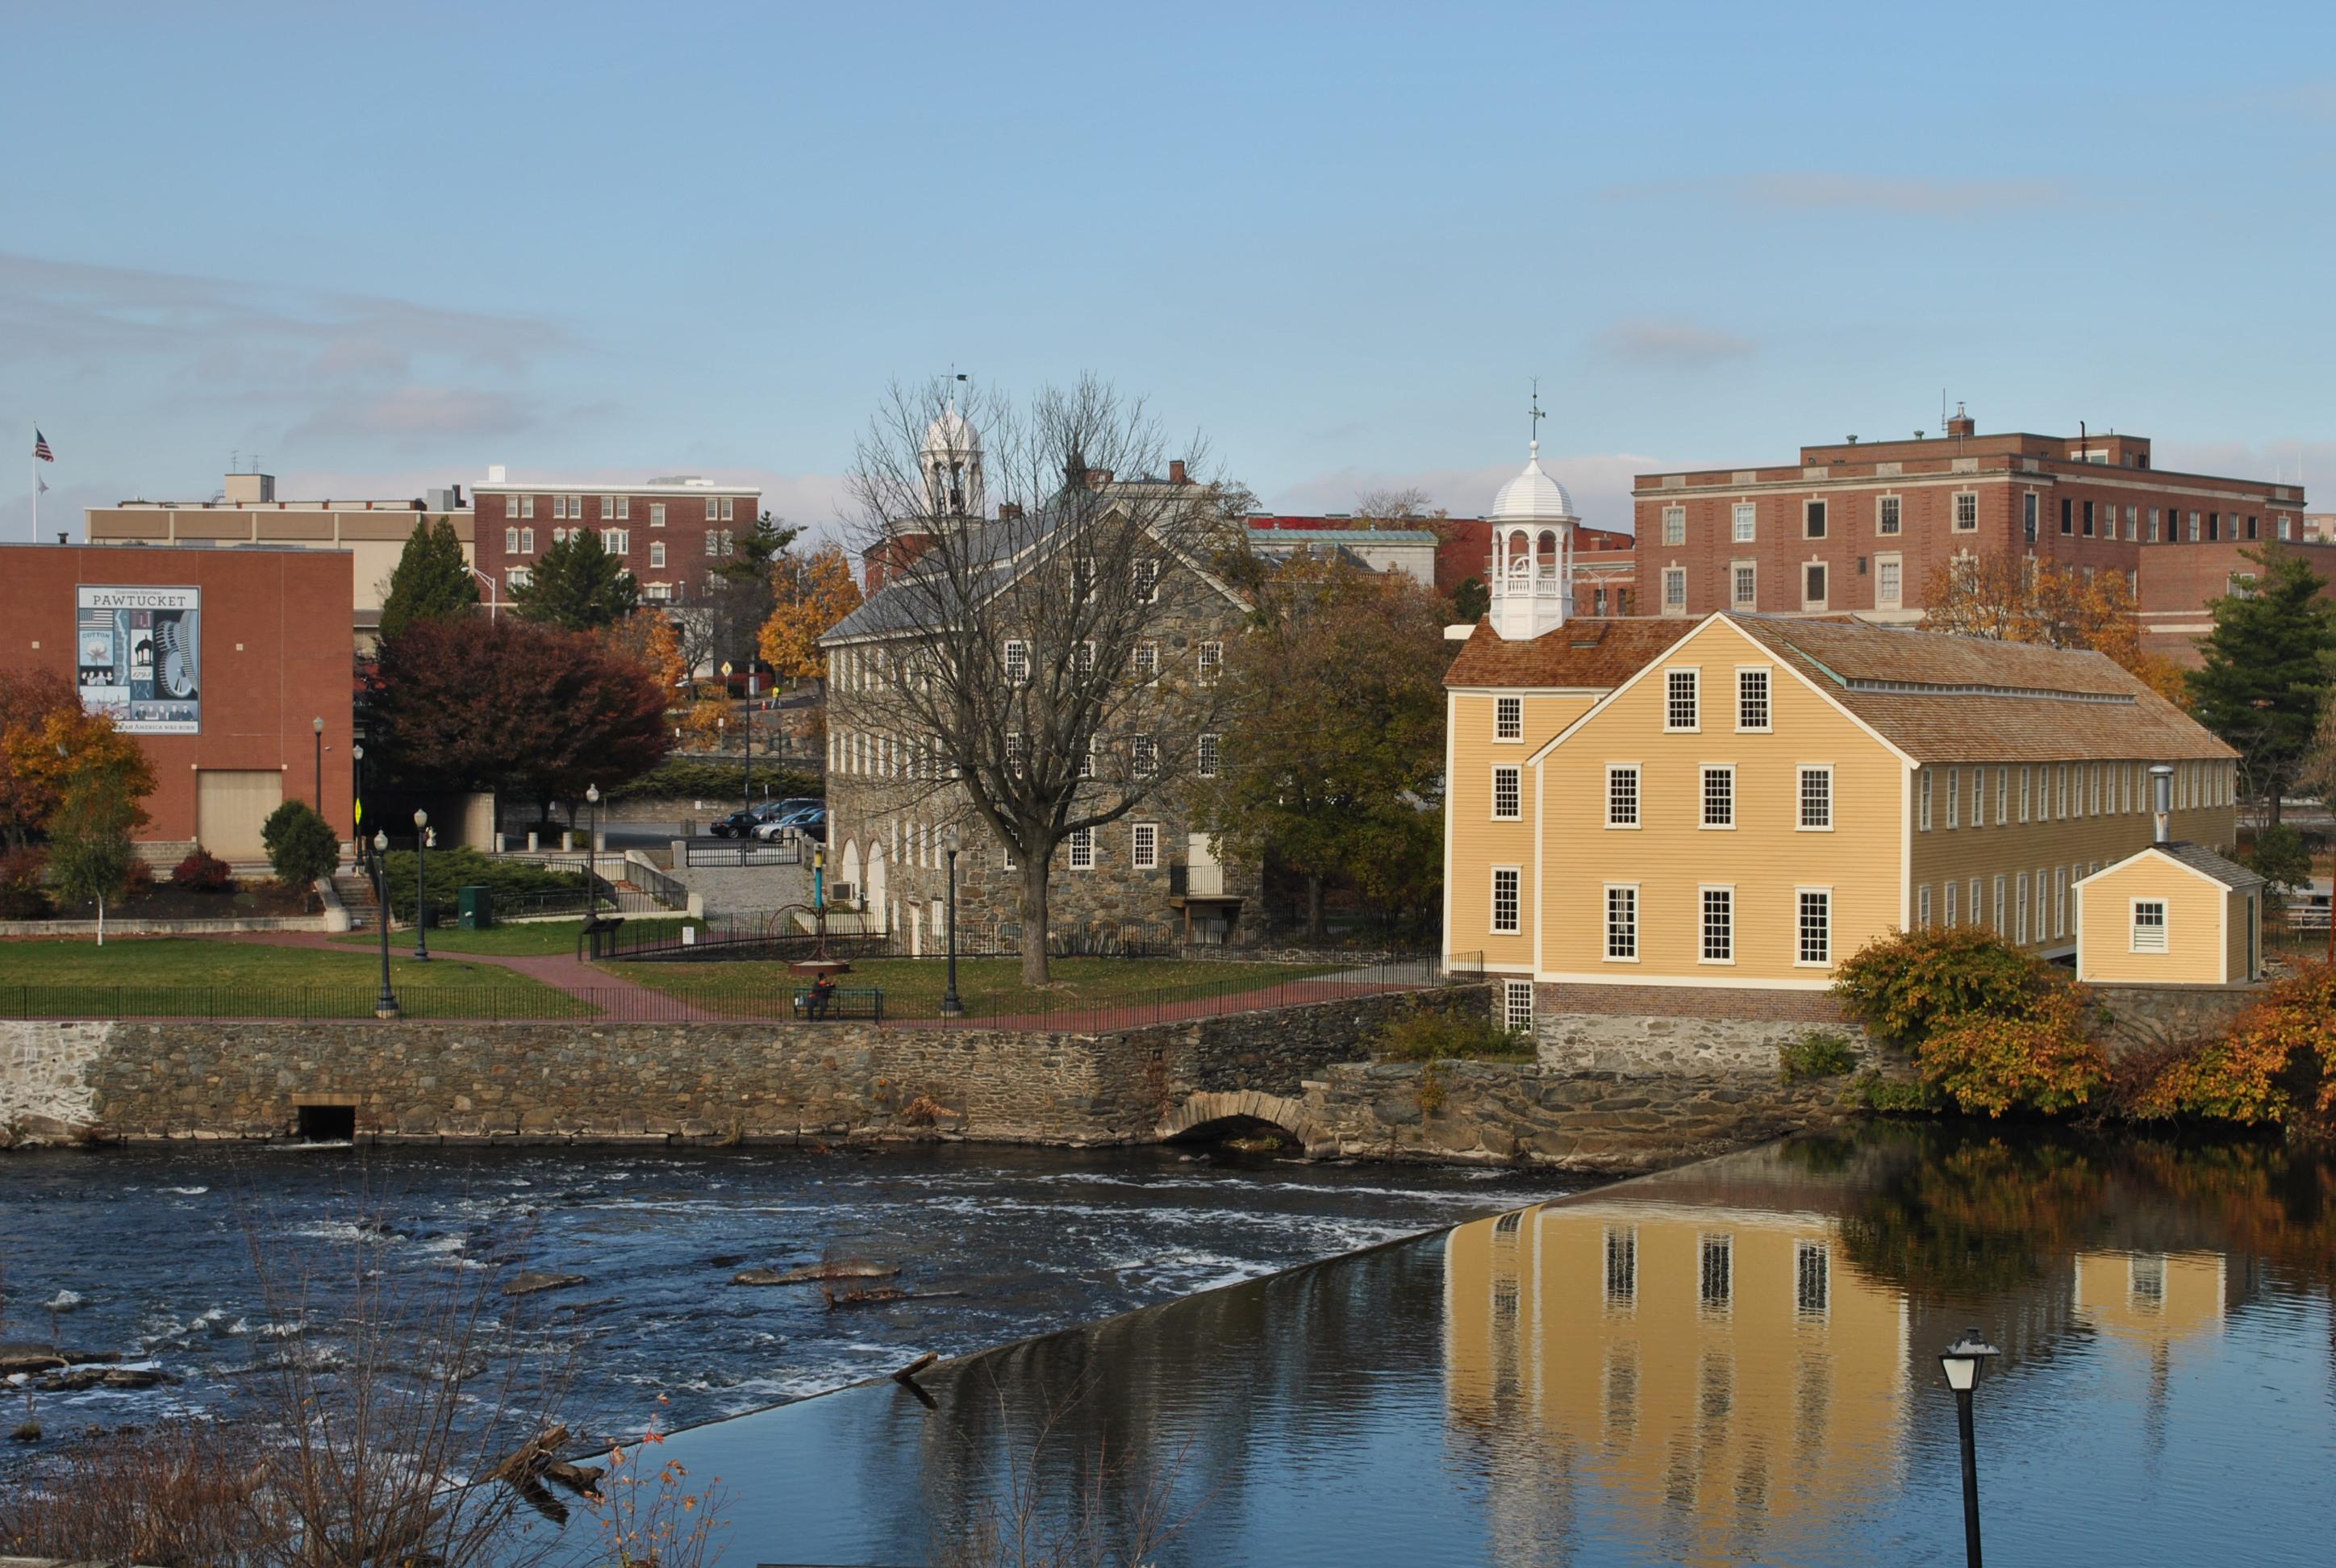 River in foreground with yellow mill and other buildings in distance